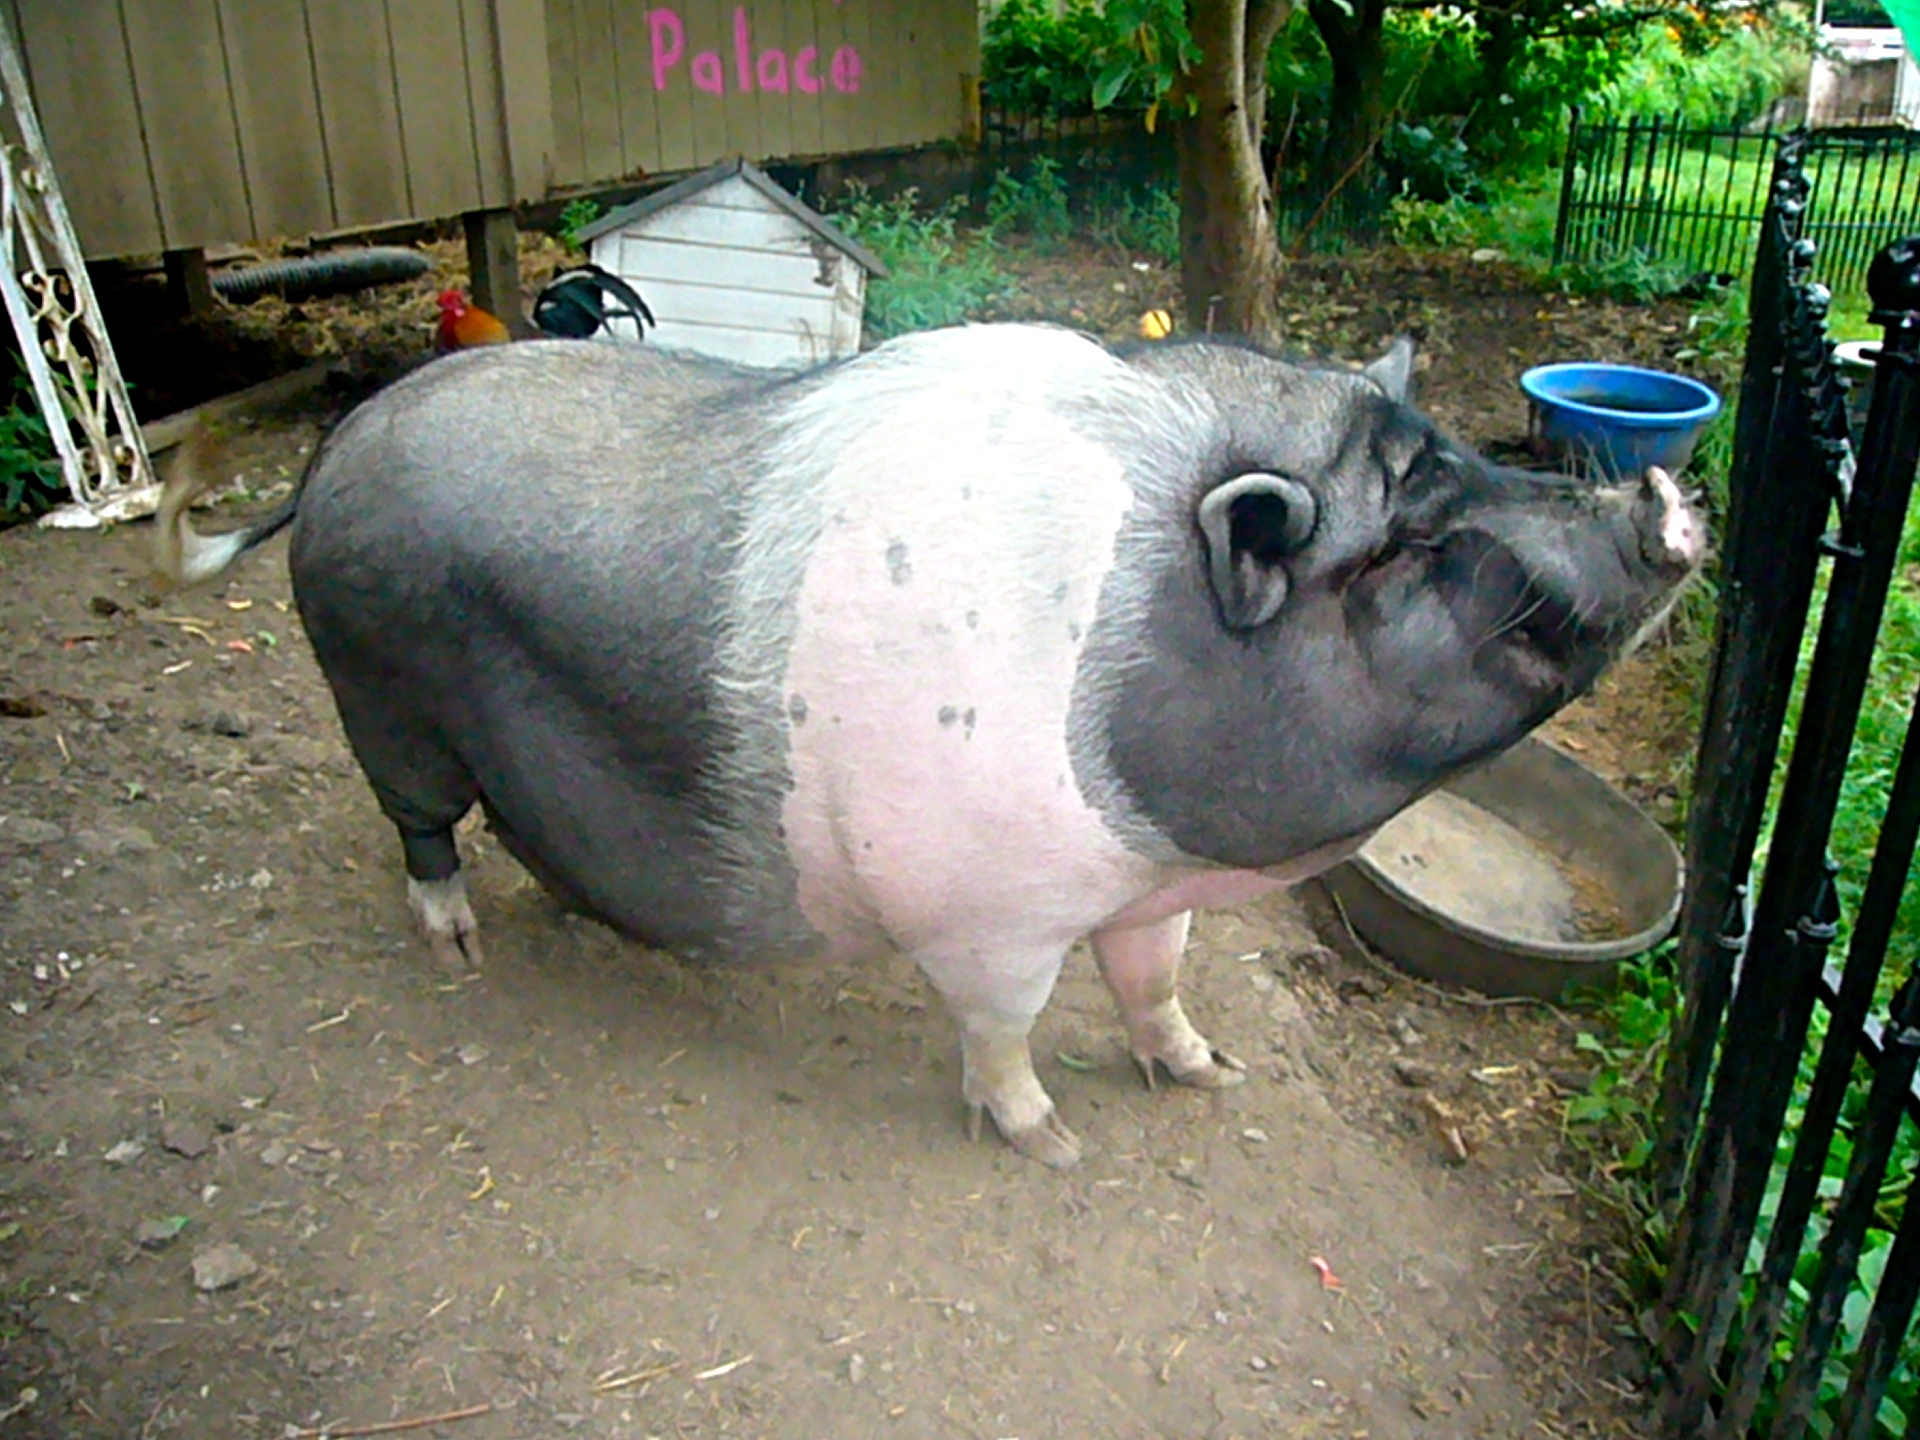 A large pig.